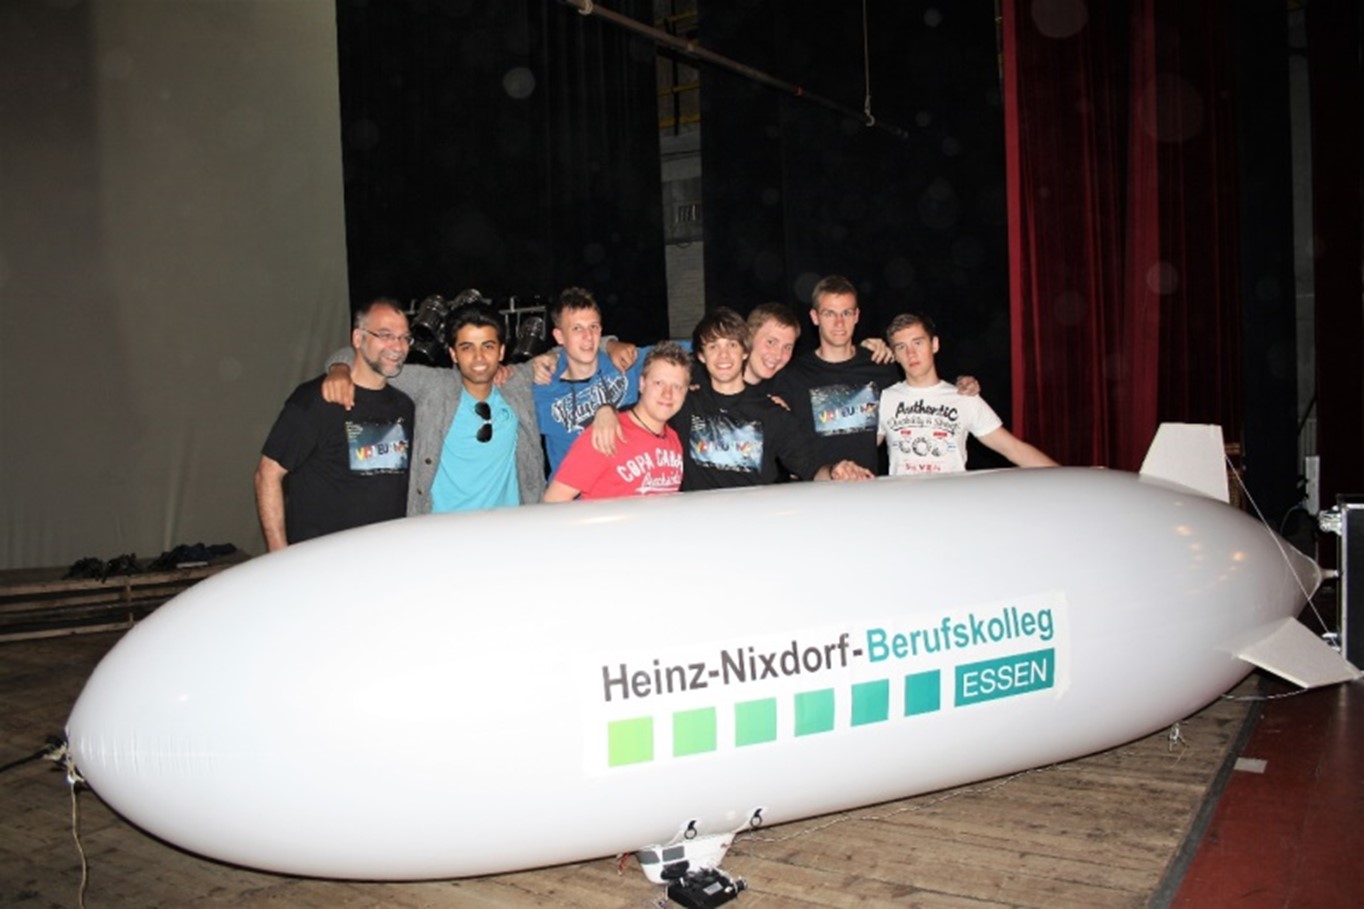 Group image with Zeppelin